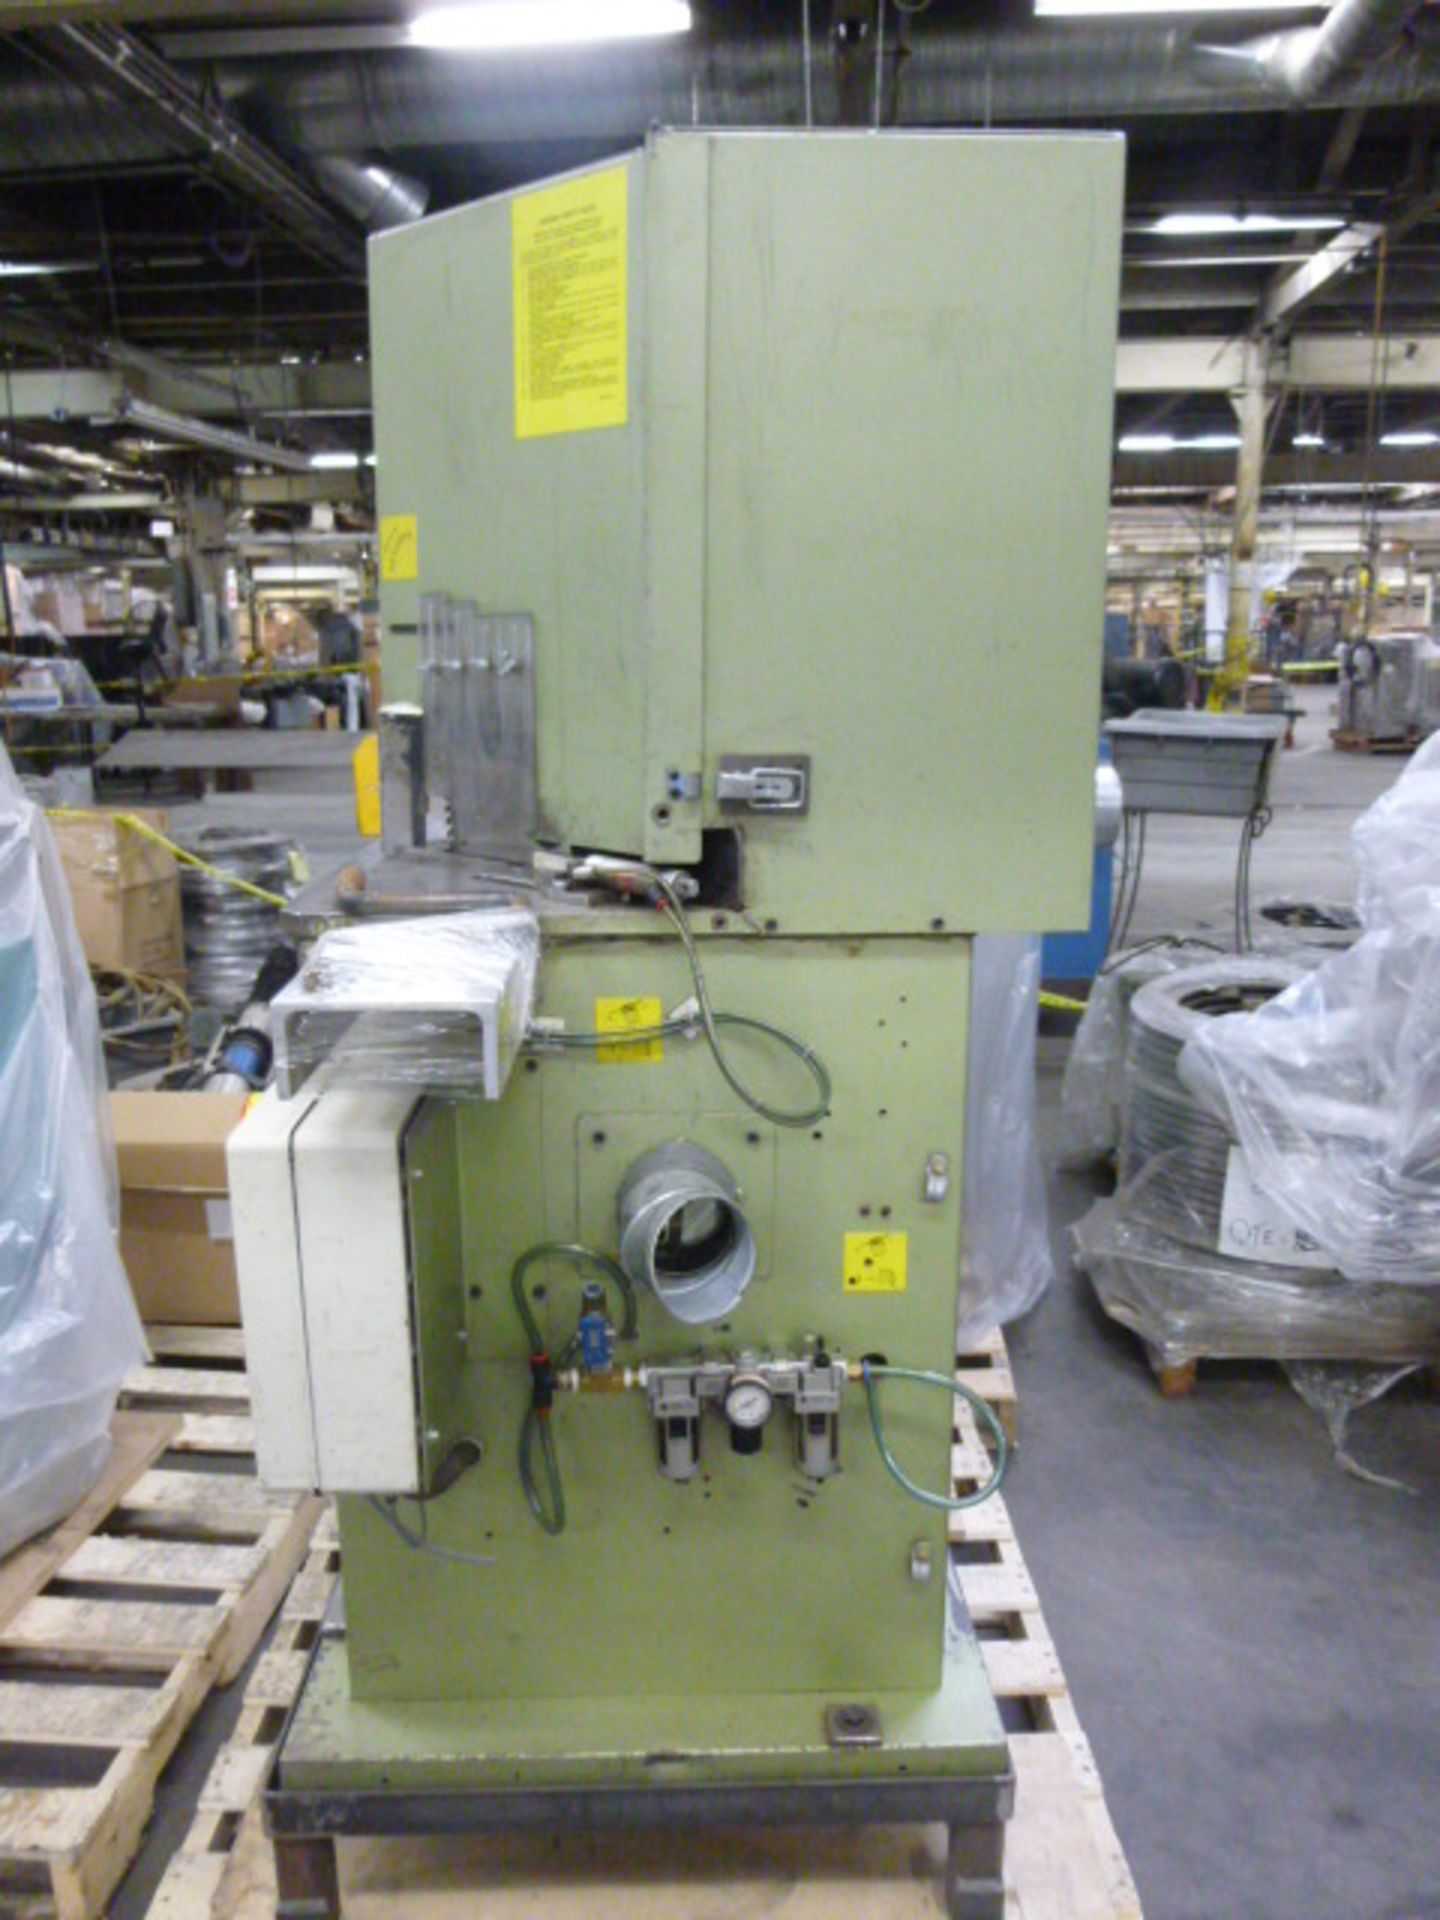 Brevetti Double Cut Saw revetti cuts in 45 degree Model: C16 -45 degrees cuts -Production rate 800/ - Image 2 of 3